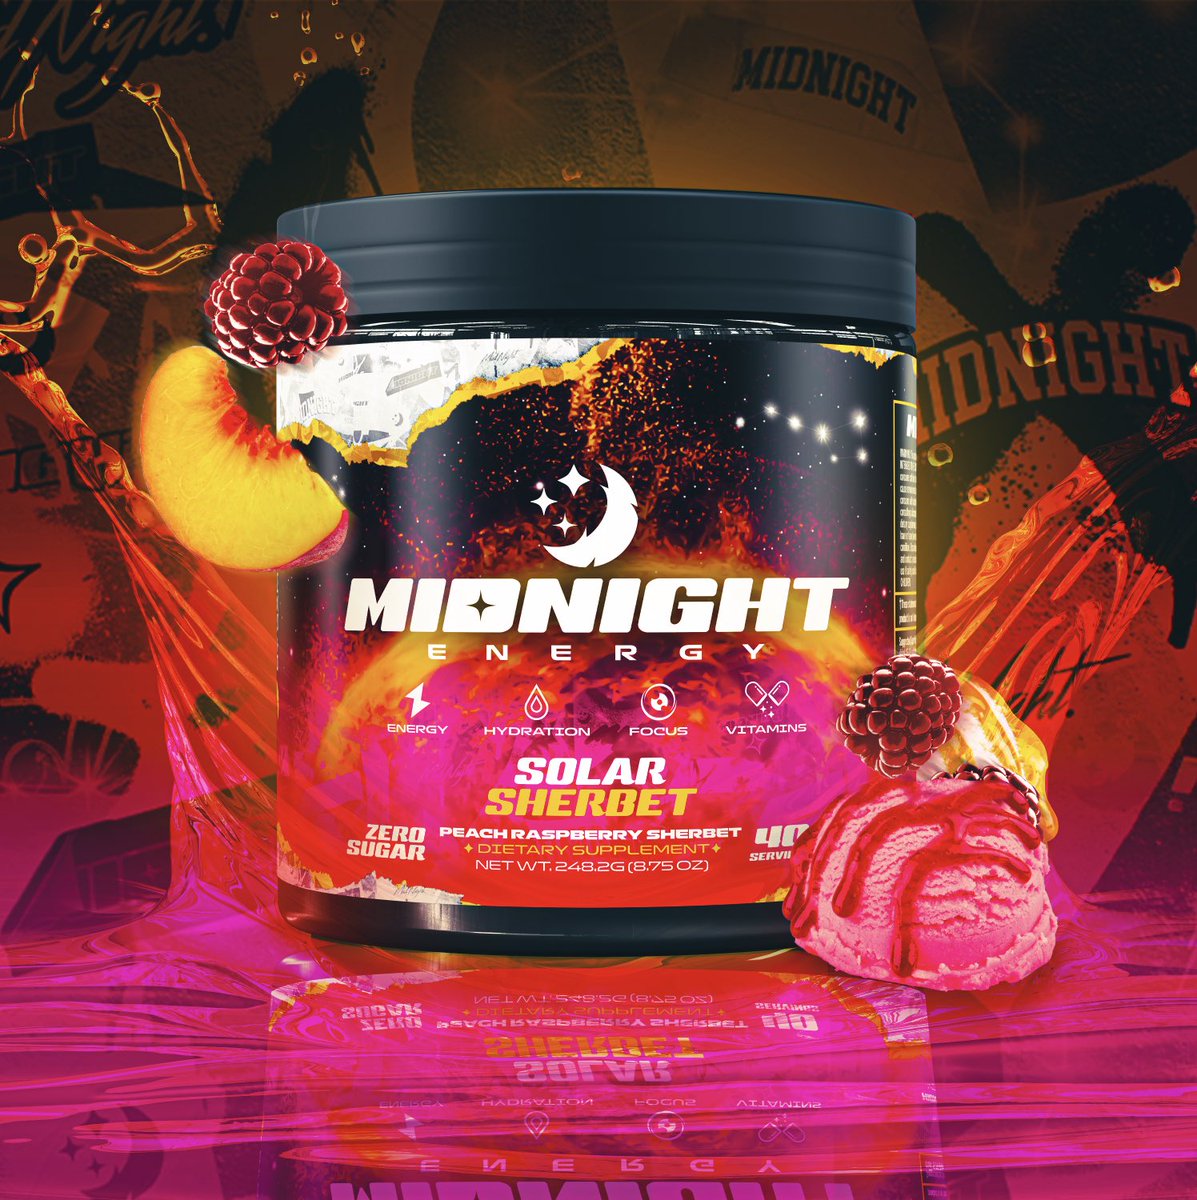 Have you heard of the new flavor yet Solar Sherbert😋🤤🤤. Releases 3.17.23 Use code “DIDIT” for 10% discount! @DrinkMidnight @KickStreaming #energy #nojitters #energymix #MIDNIGHT  #MidnightEnergy #KickStreamer